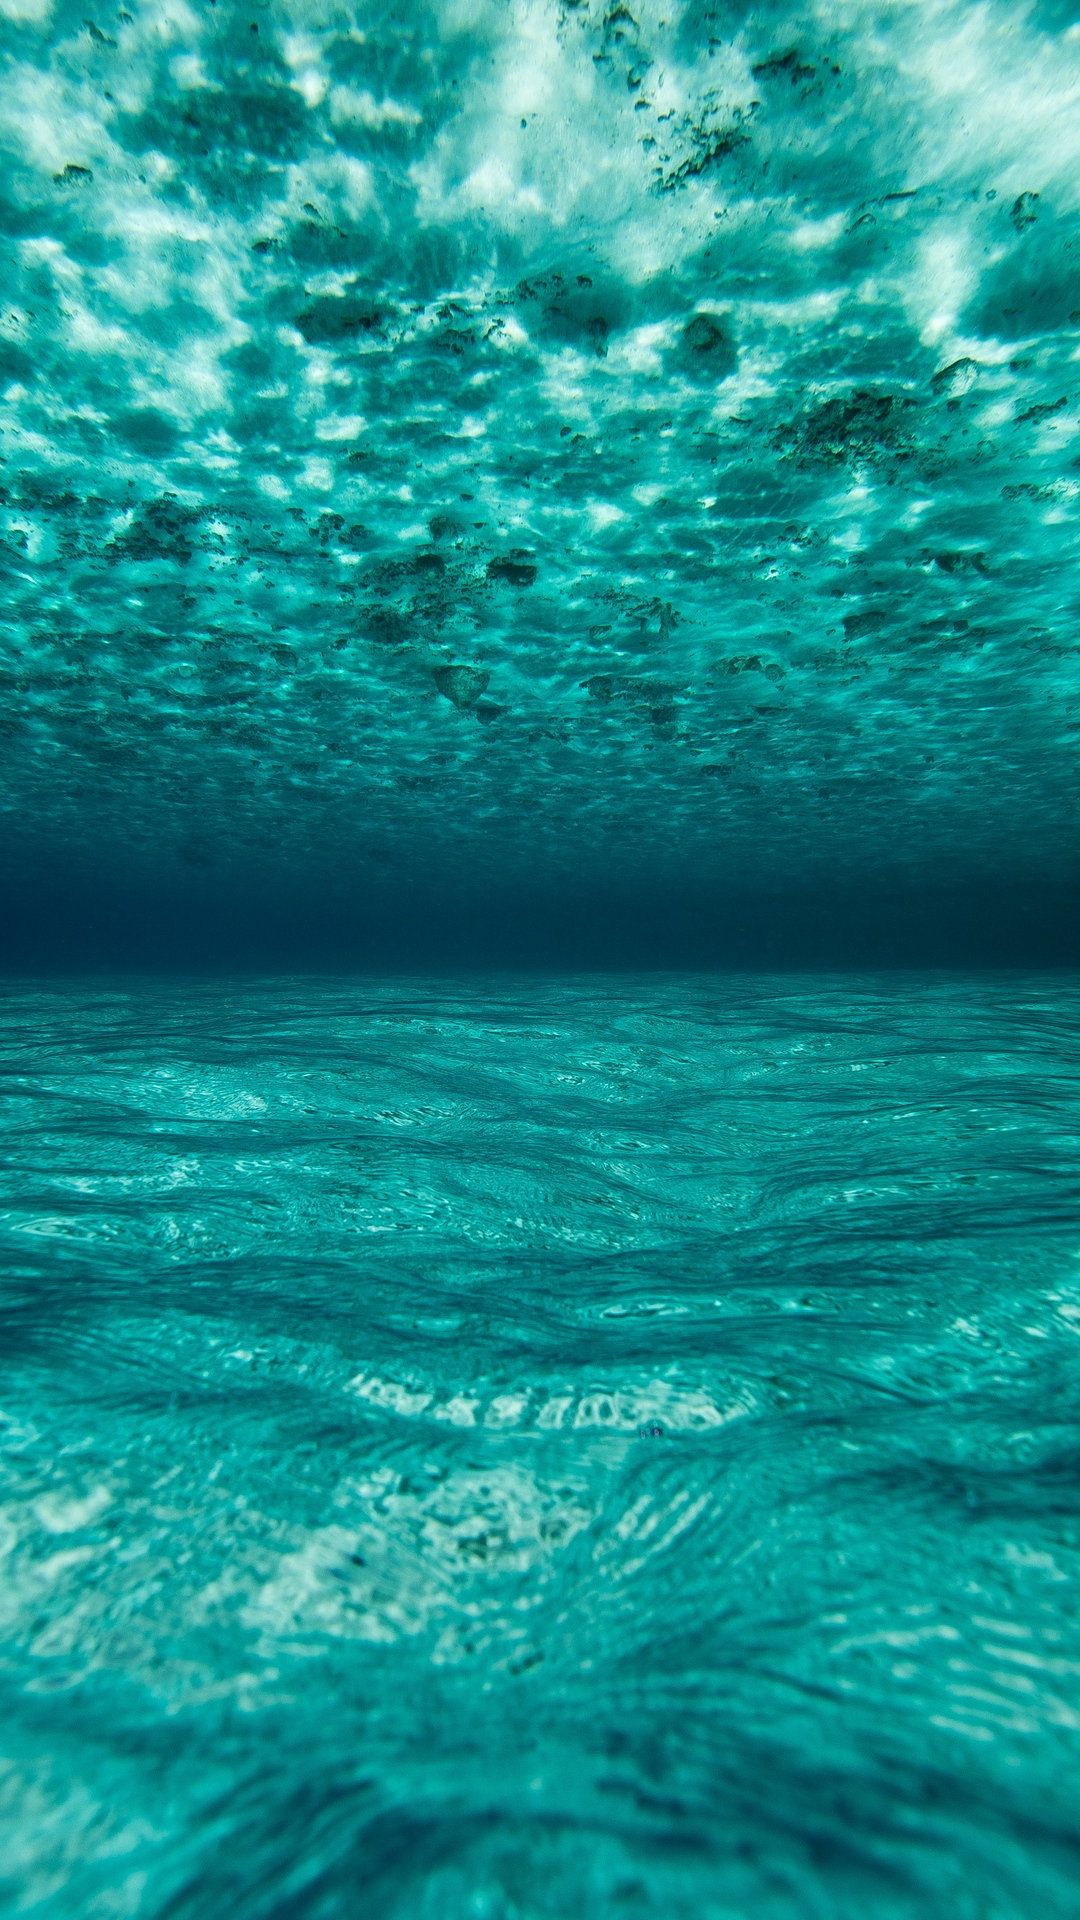 A view of the ocean from underneath - Underwater